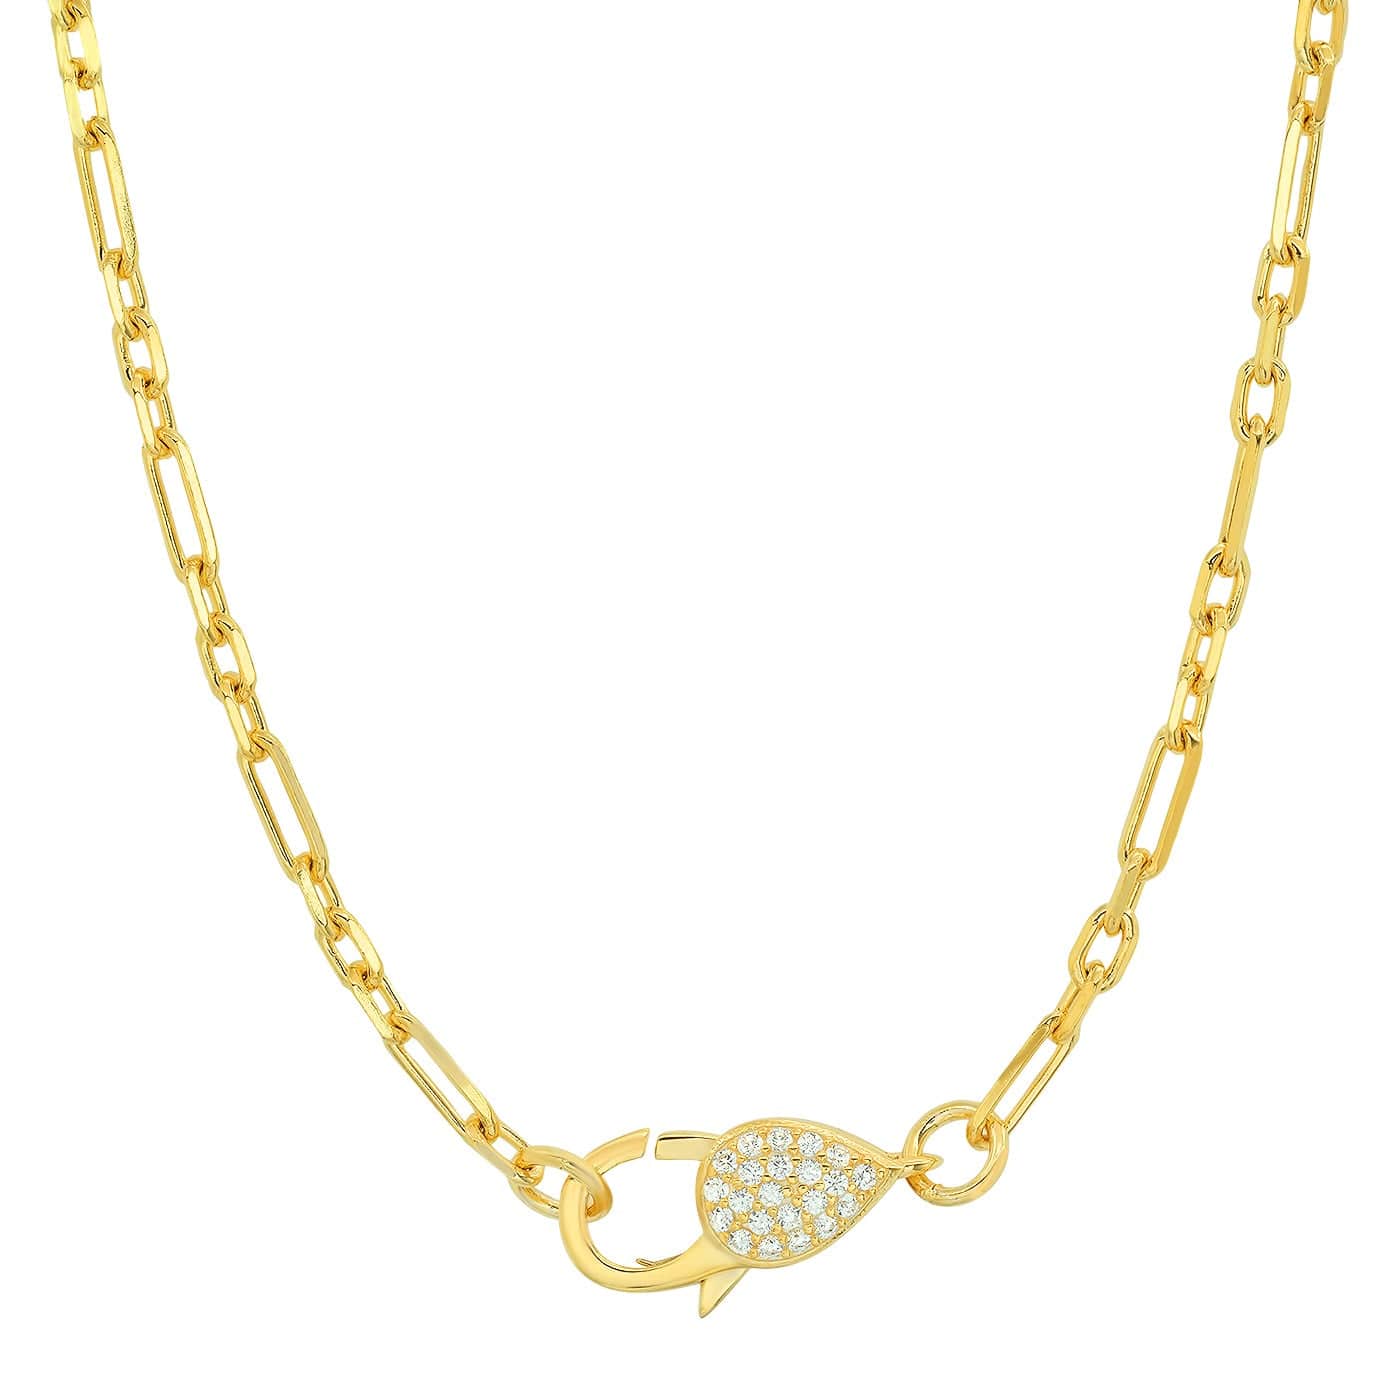 TAI JEWELRY Necklace Chainlink Necklace With Pavé Closure